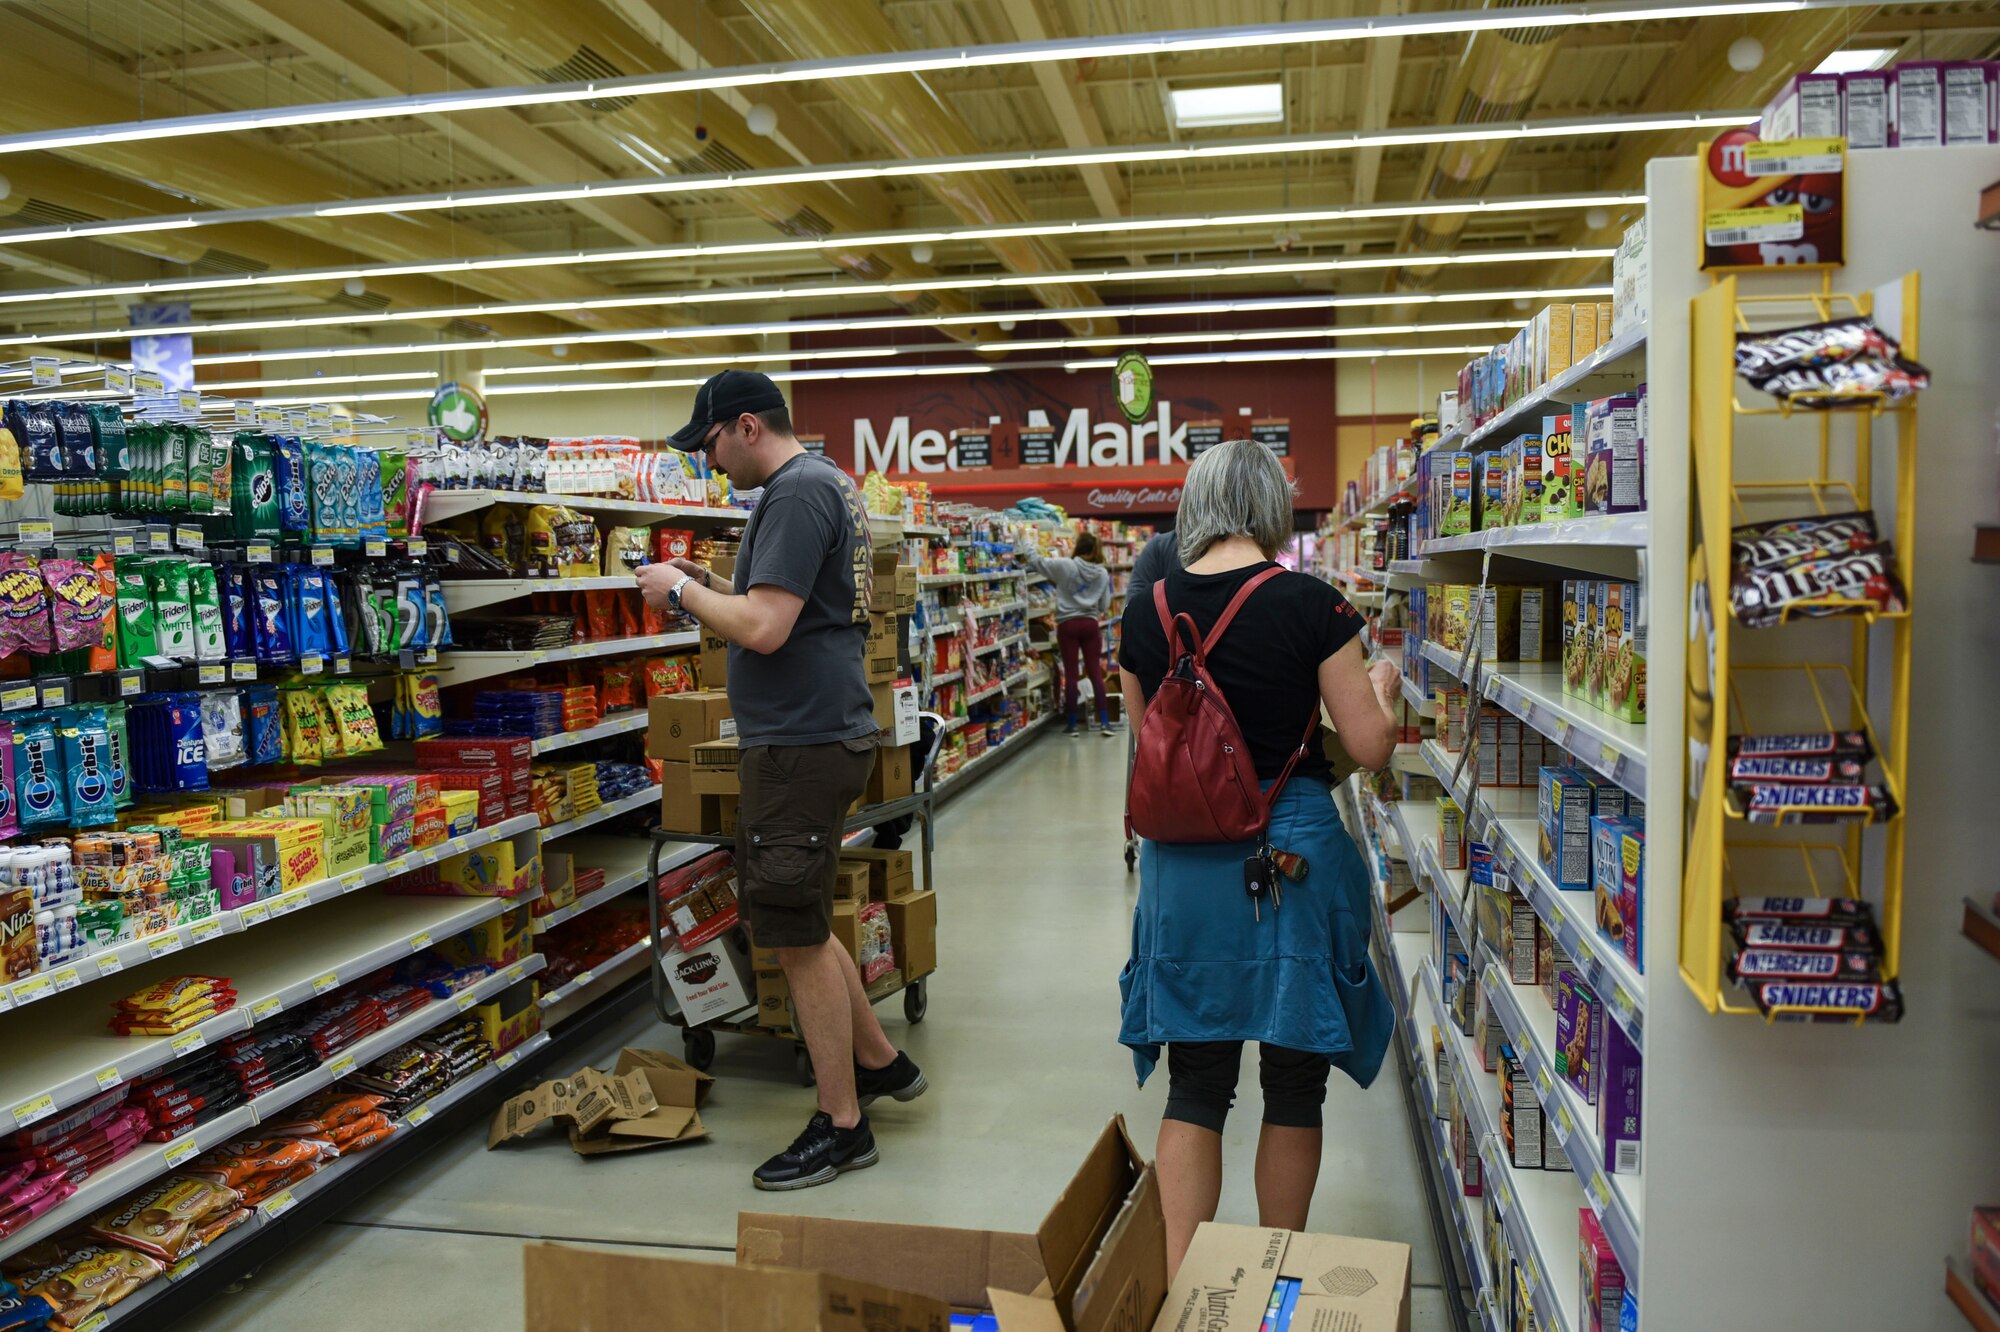 Airmen and families volunteer in the Commissary at Spangdahlem Air Base, Germany, March 23, 2020. Volunteers throughout the base community offered to box and stock shelves because of the current high demand of products. (U.S. Air Force photo by Senior Airman Melody W. Howley)